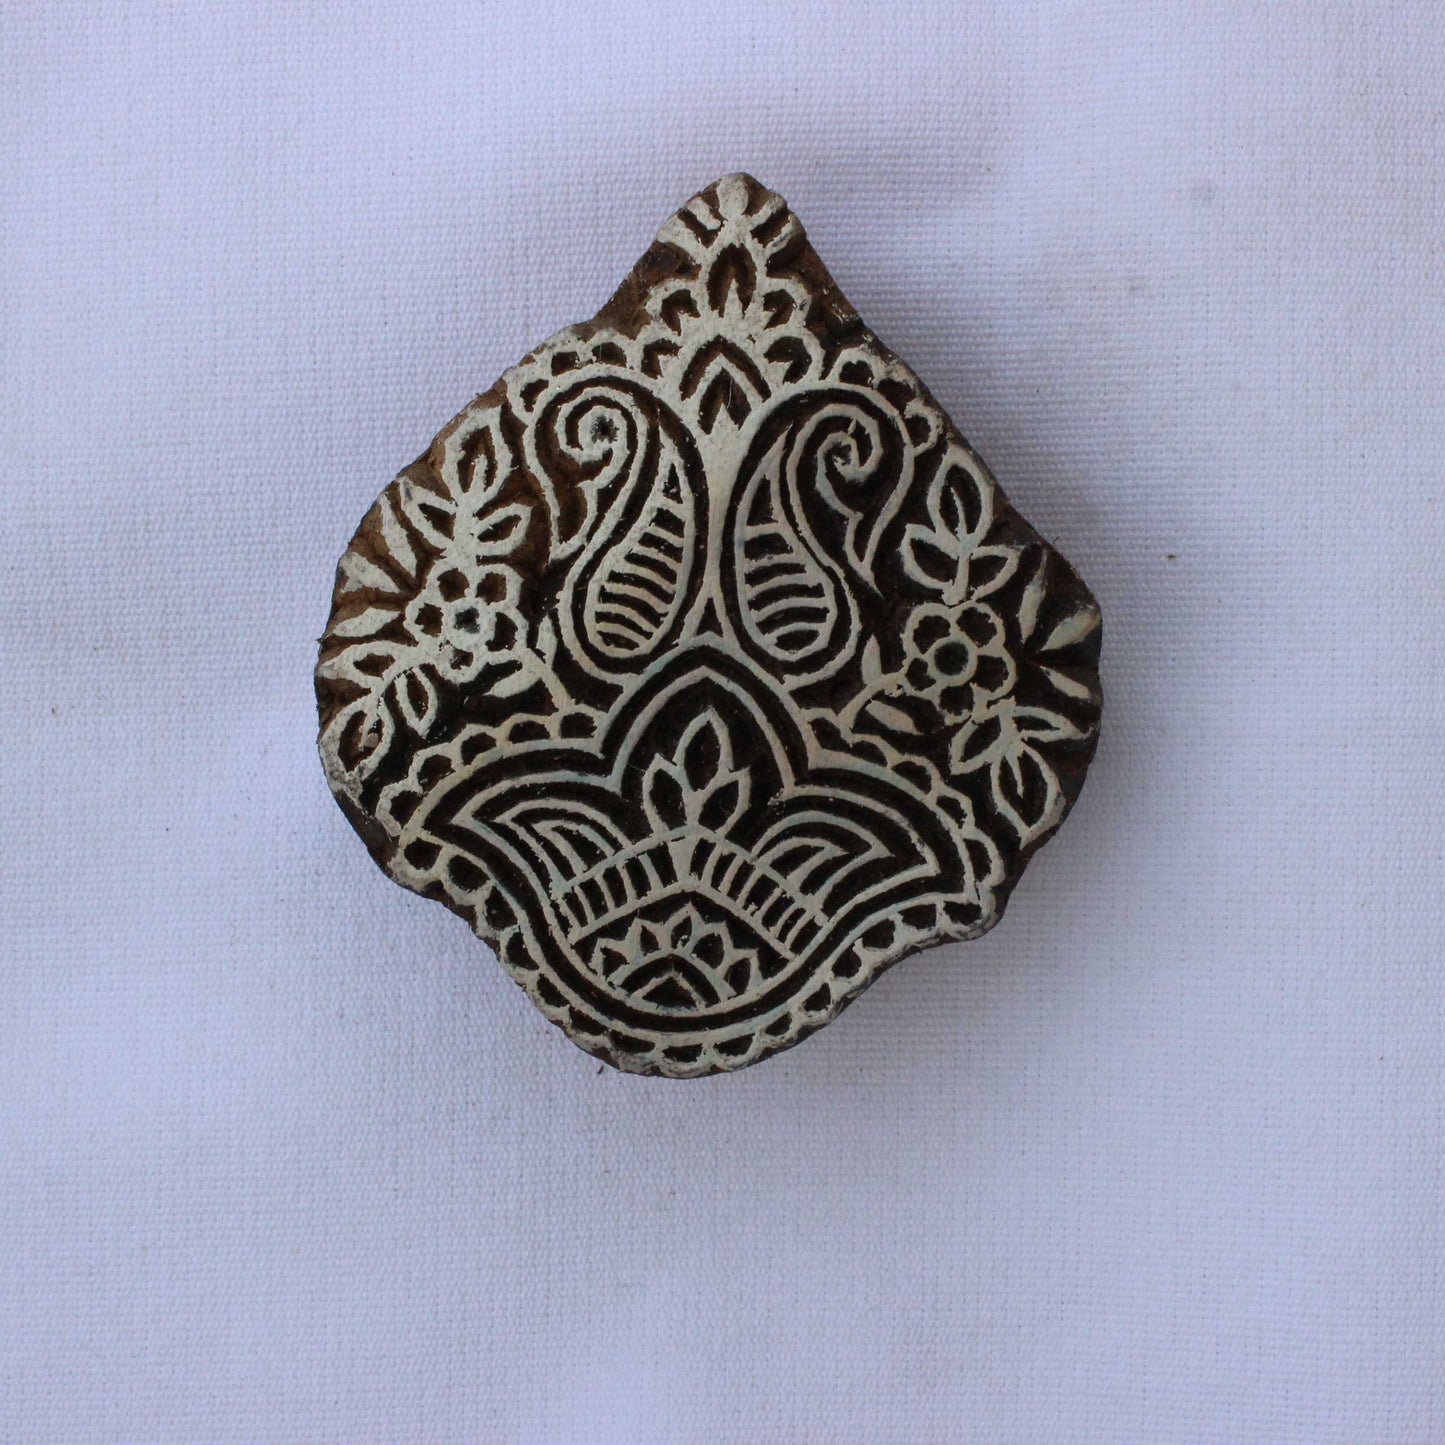 Paisley Fabric Block Print Stamp Floral Wood Block Stamp Hand Carved Stamp Hand Carved Wooden Stamp For Printing Petals Soap Stamp Fern